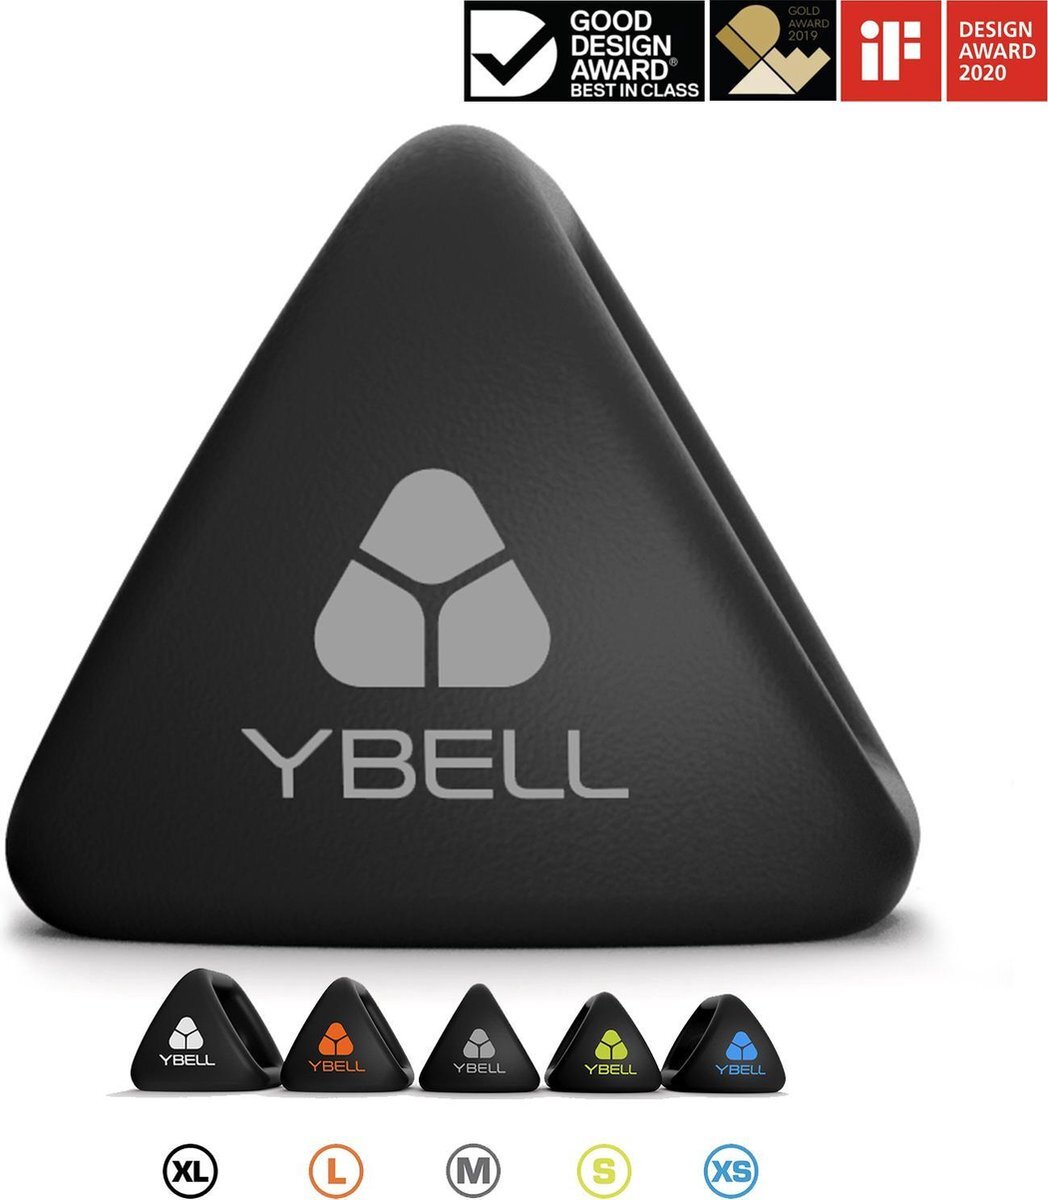 Ybell Neo M 8kg